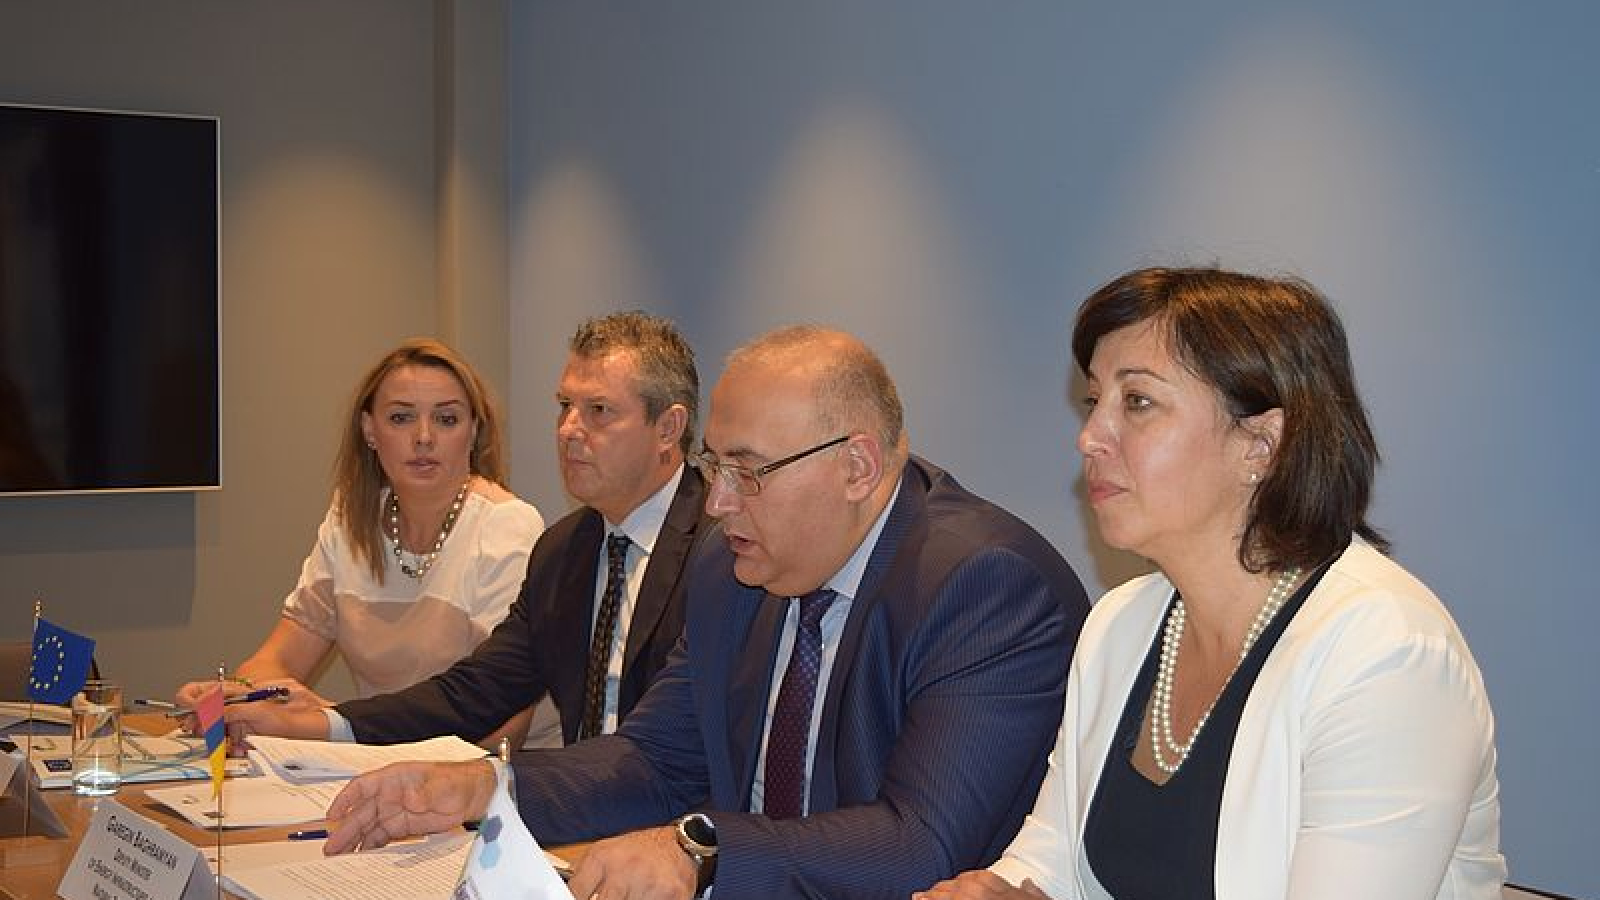 EU4Energy: Energy Charter assists Armenia in improving policymaking process in energy sector